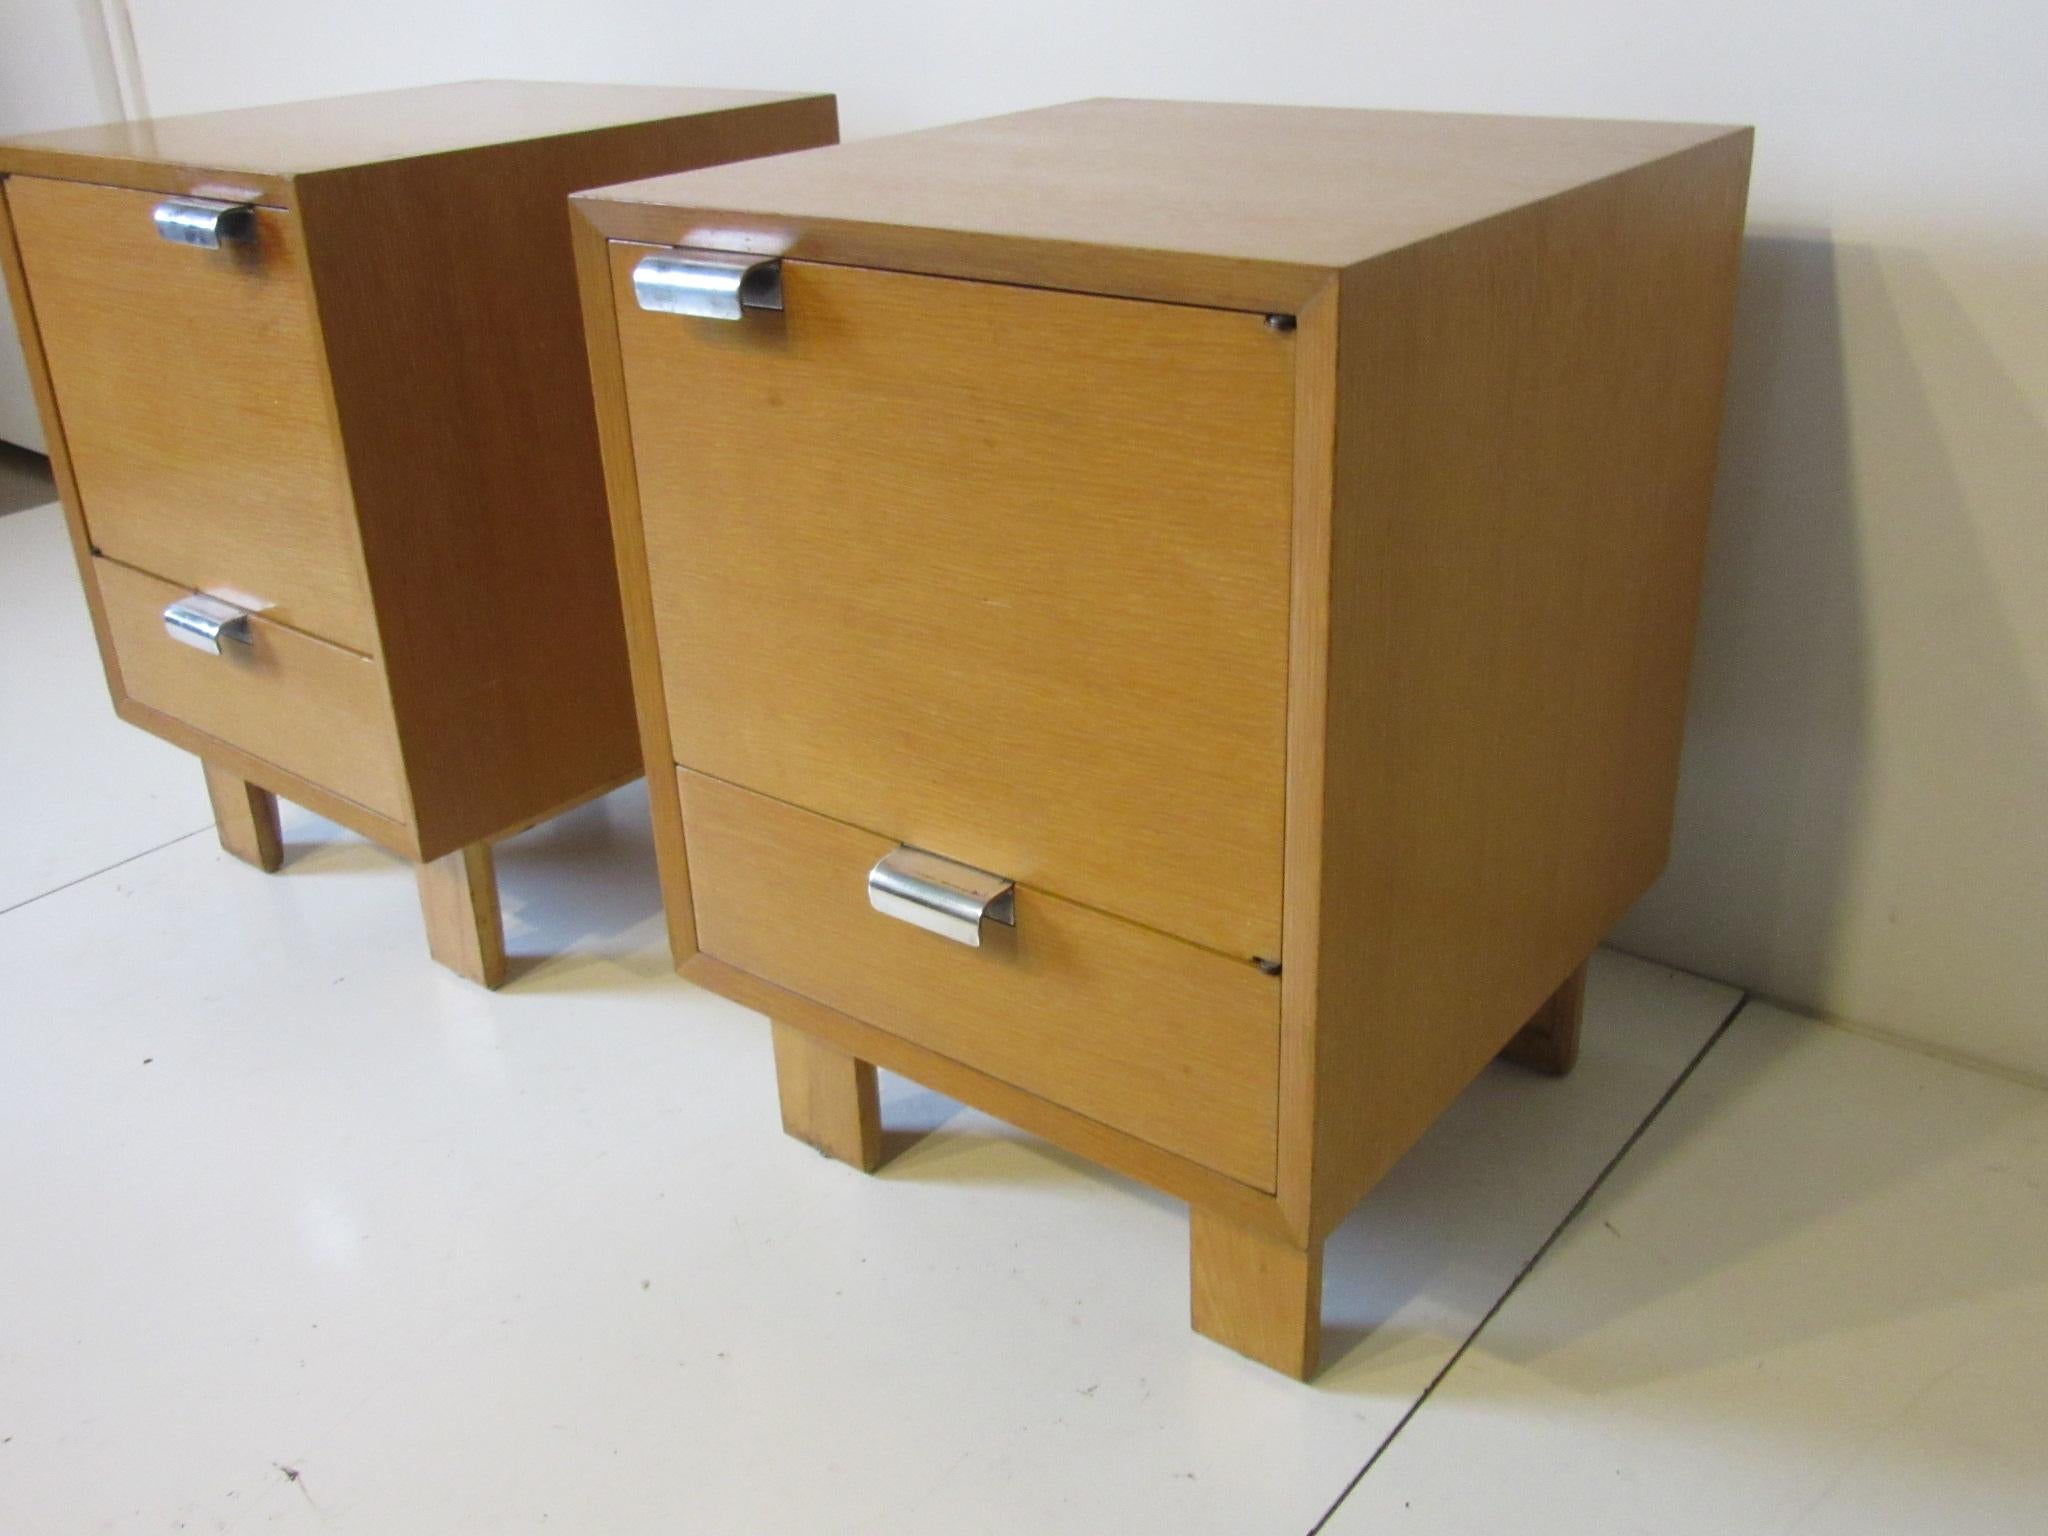 A pair of combed oak nightstands model # 4617 with left and right hinged doors and lower drawer with larger and heavy duty special ordered silver plated J pulls. Inside the nightstands have a generous amount of room with the door backs having two